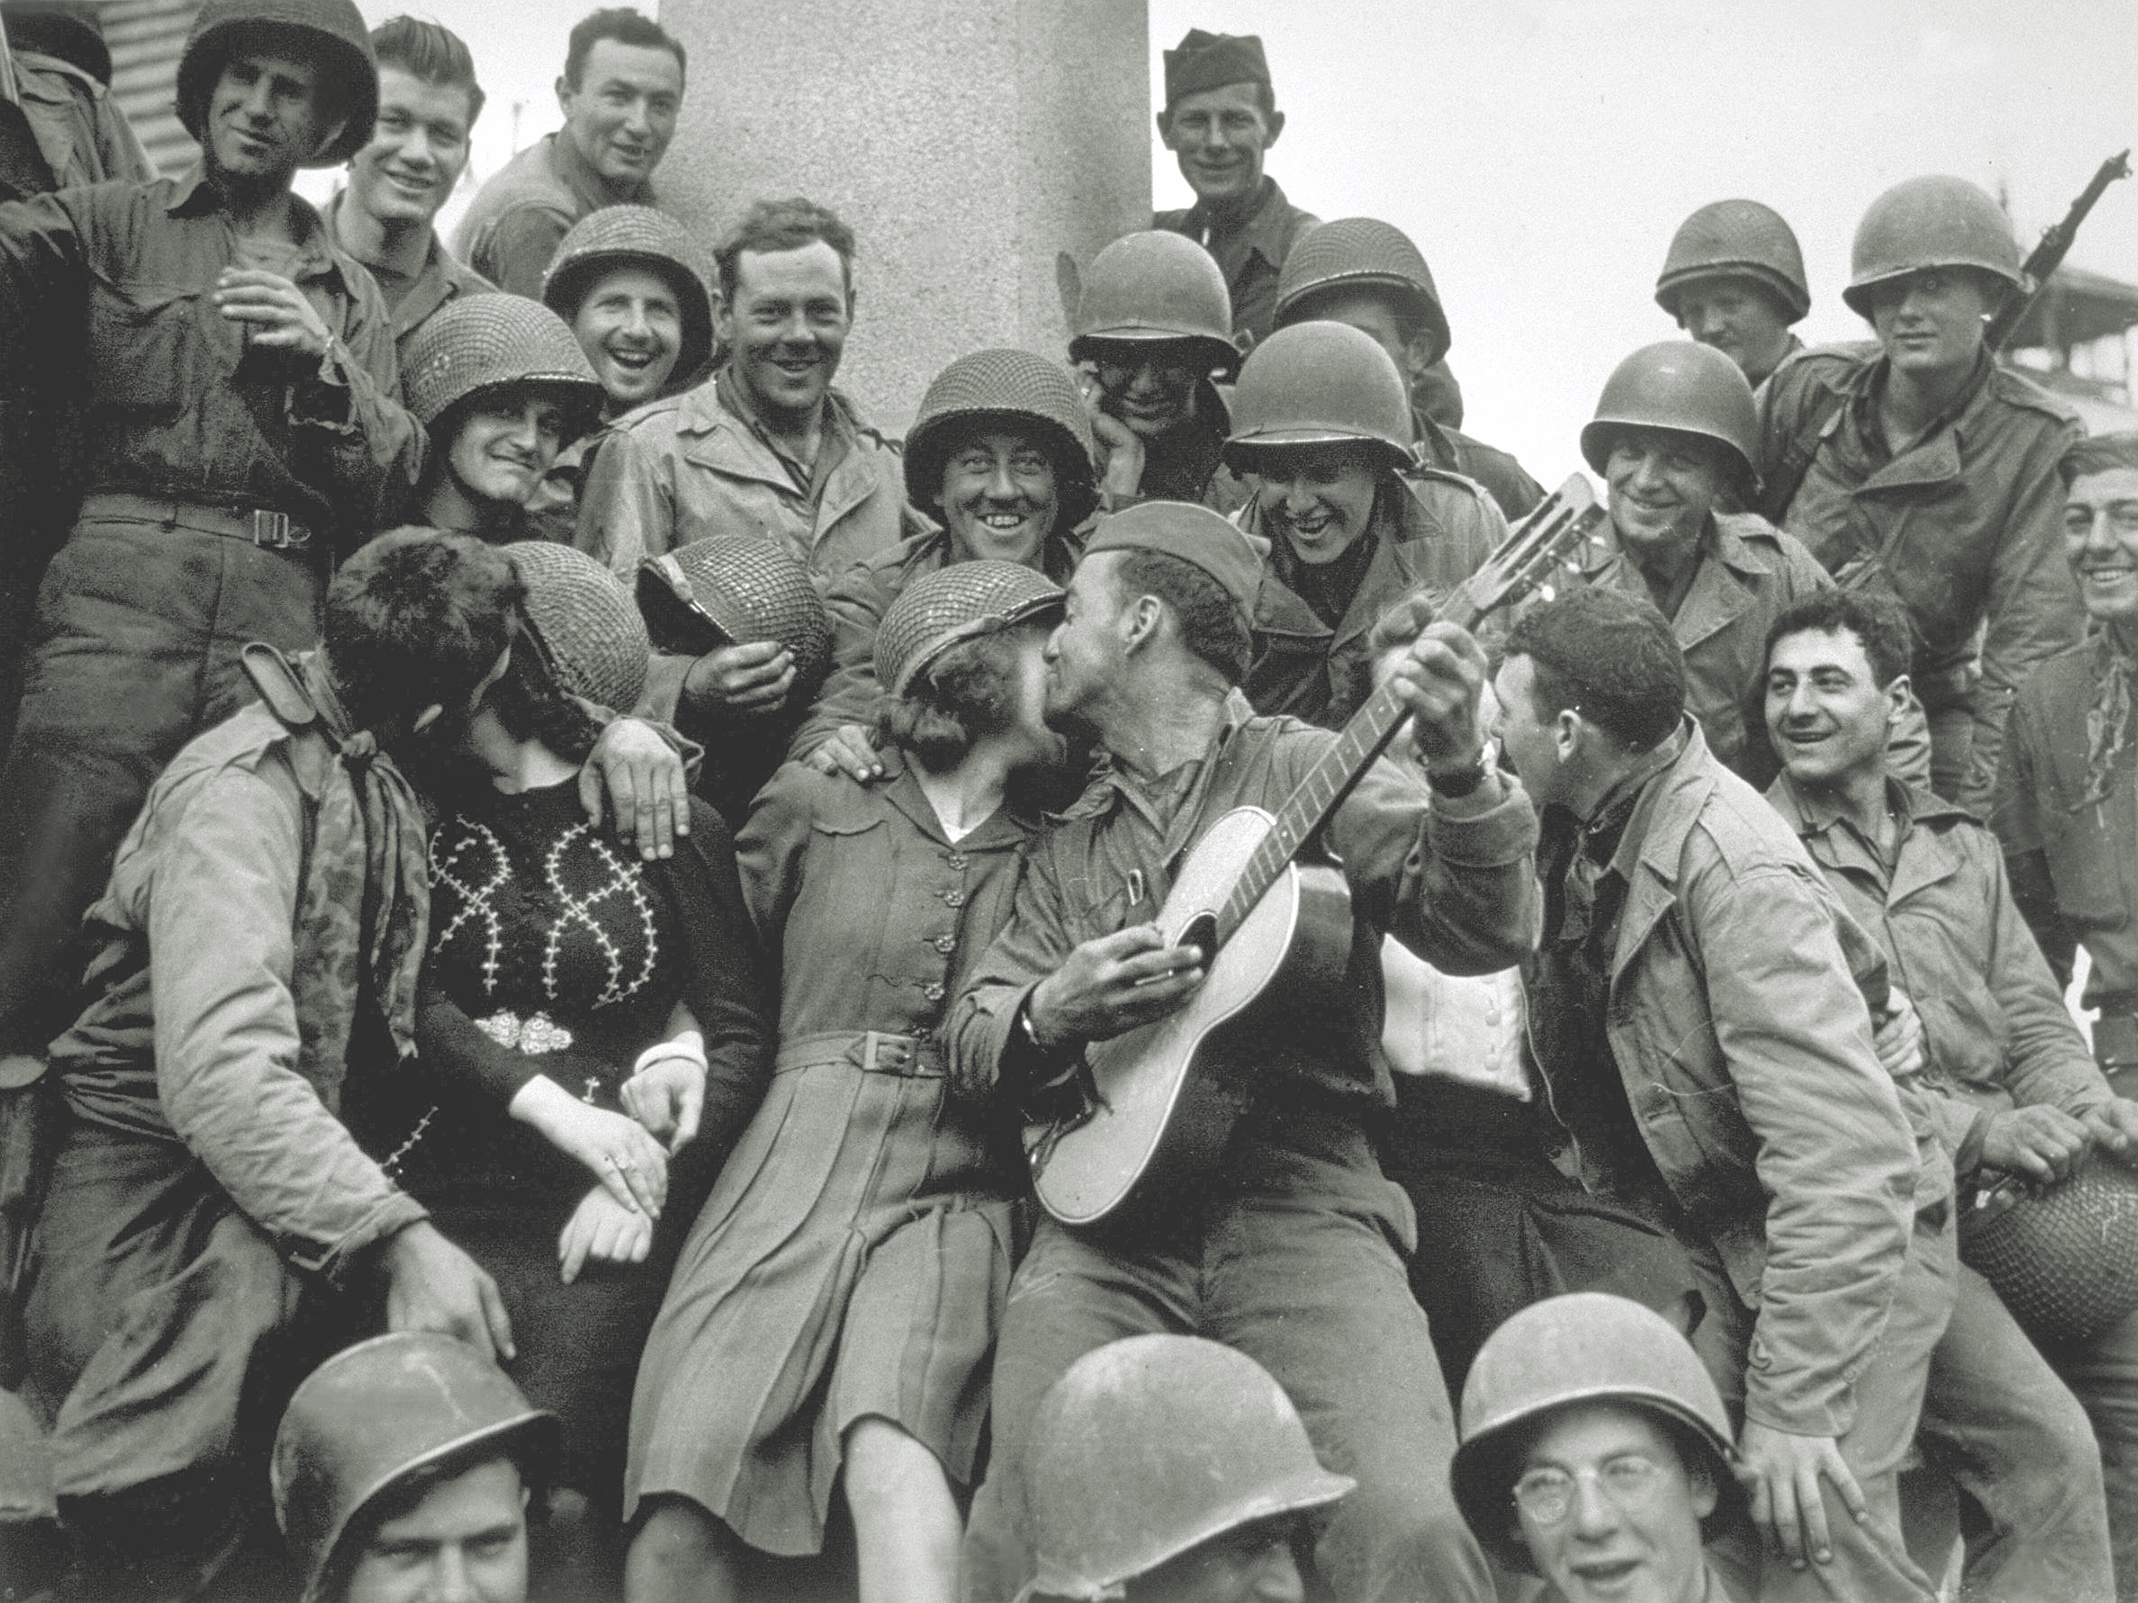 American GIs receive a warm welcome from the locals after liberating Cherbourg. (Keystone/Getty Images)